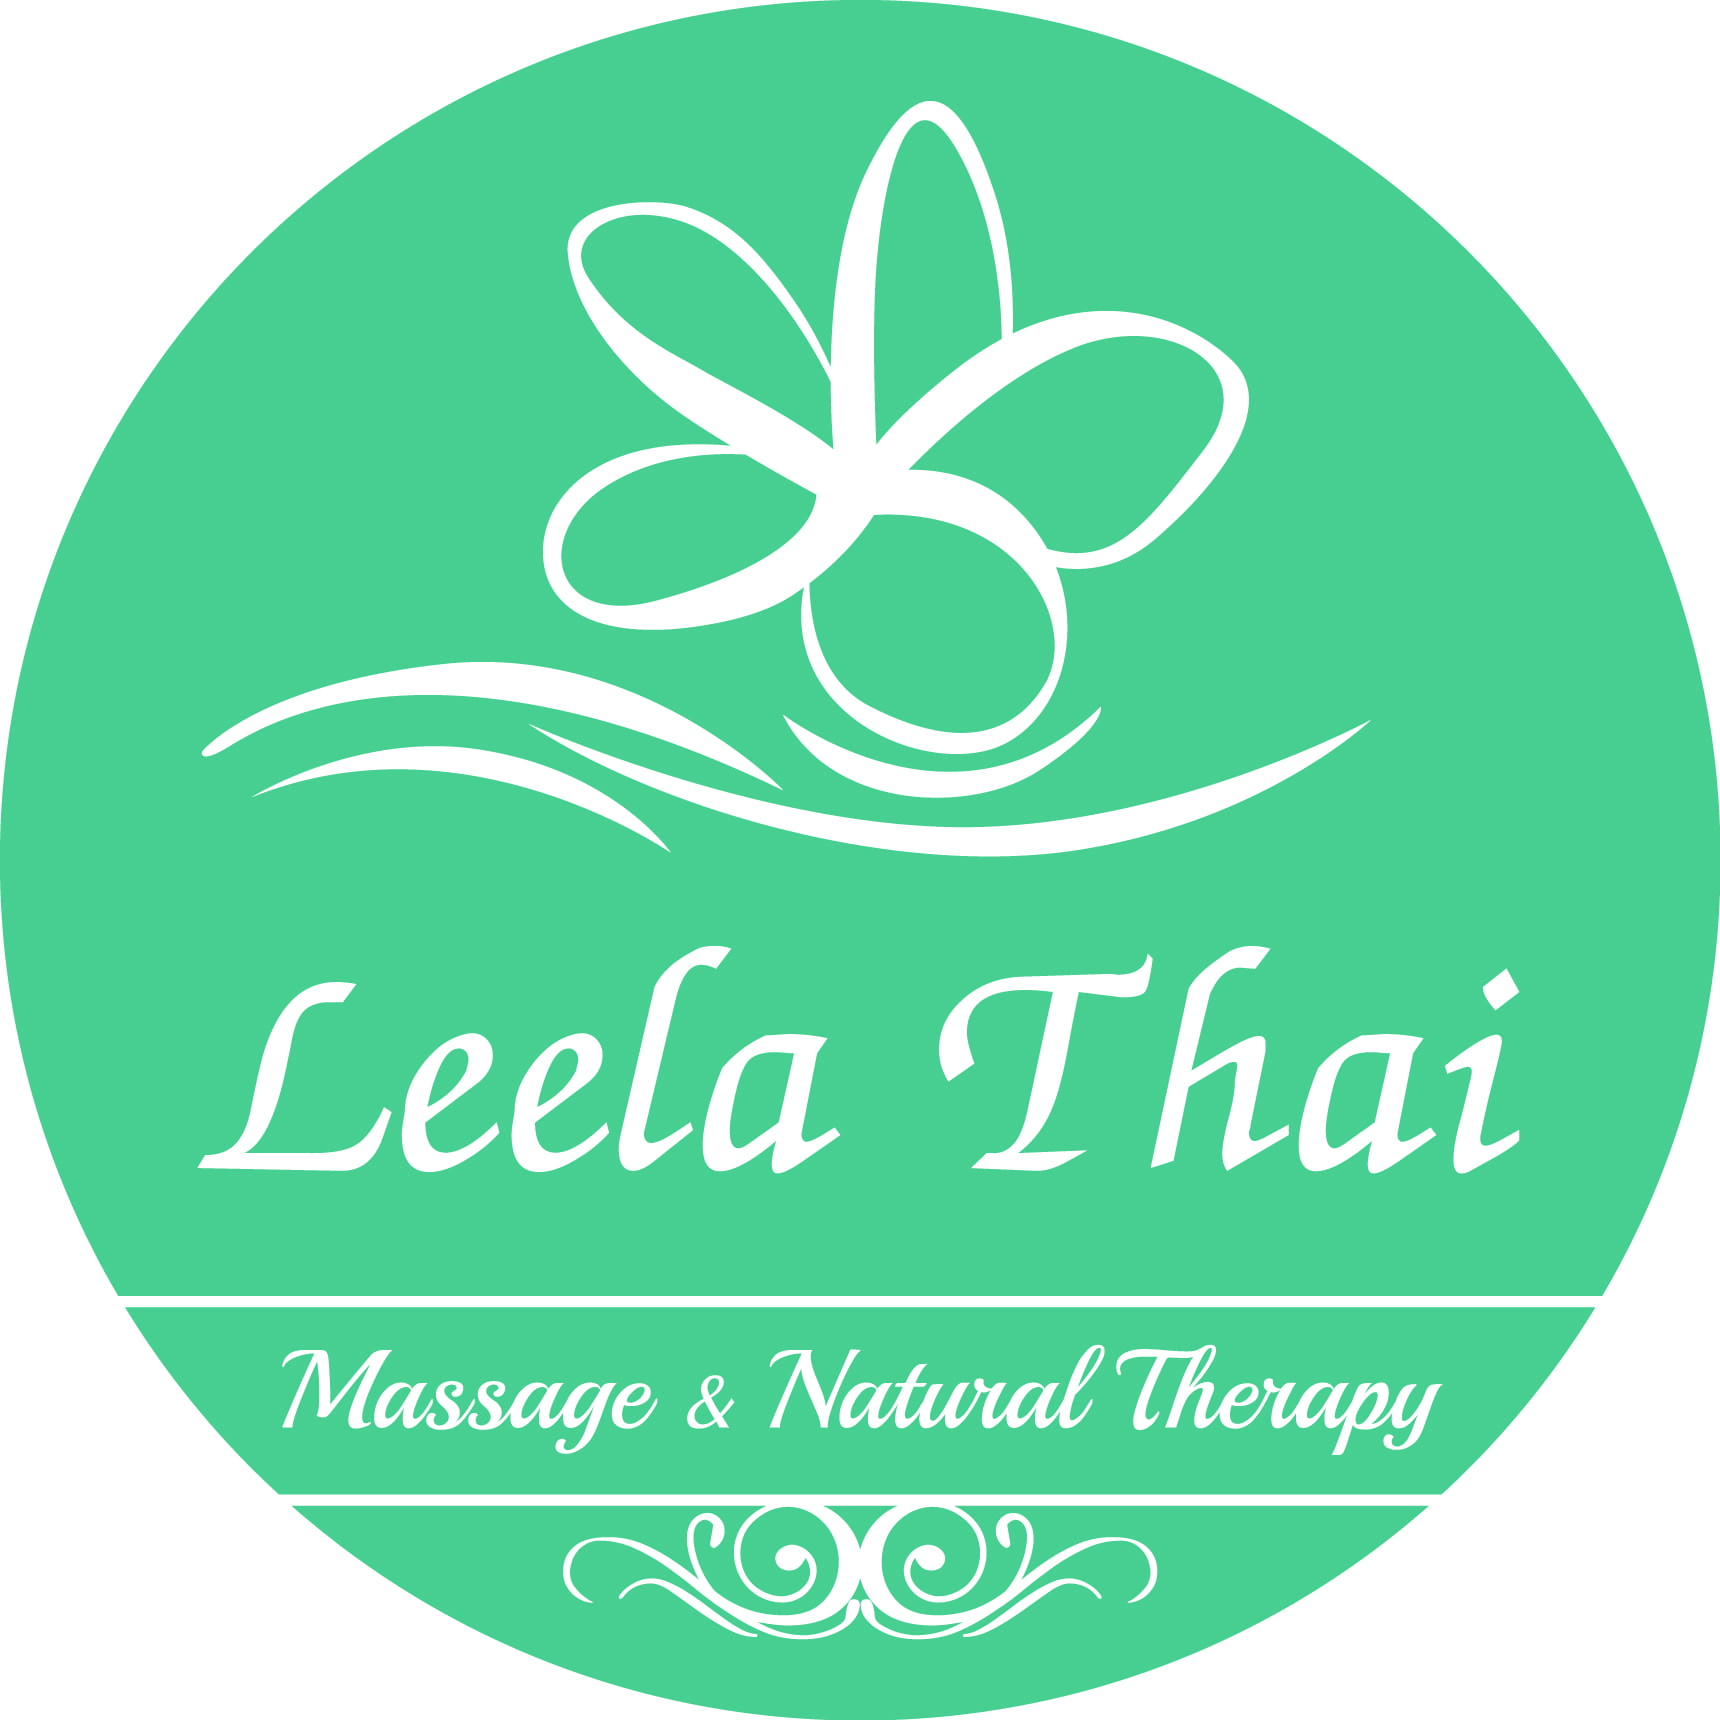 Experienced Massage Therapists